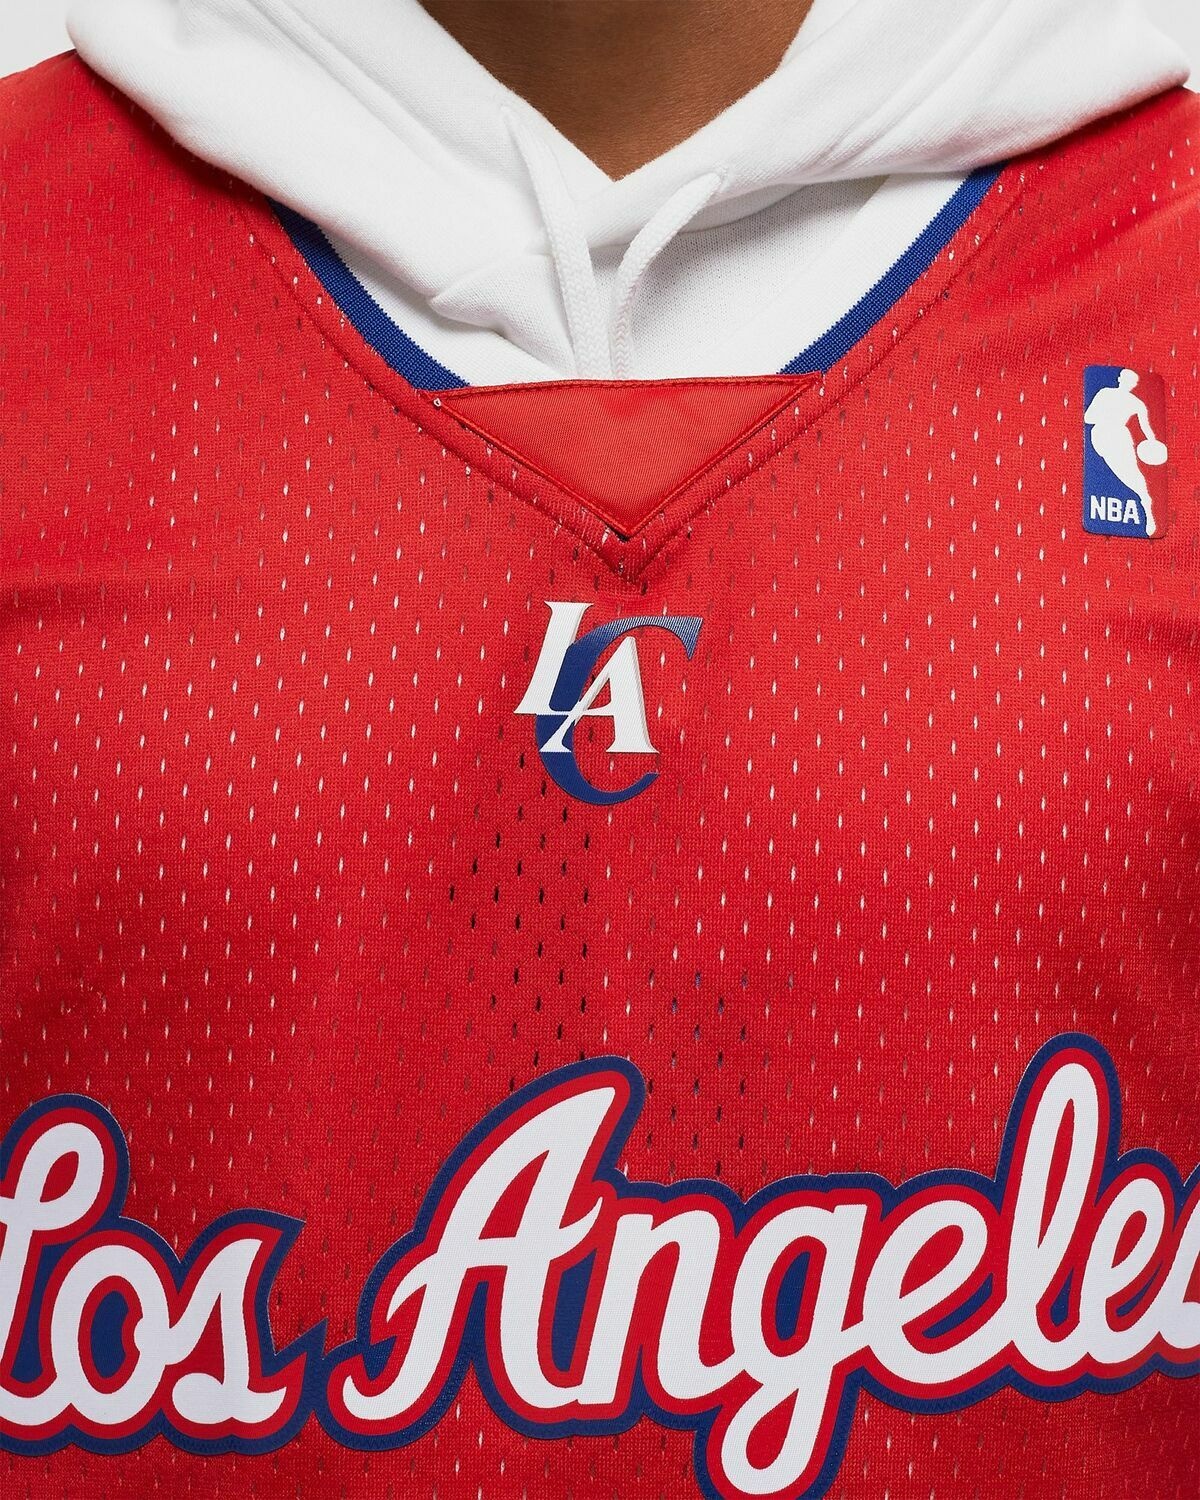 Mitchell & Ness Nba Jersey Los Angeles Clippers 2012 13 Jamal Crawford #11 Red - Mens - Jerseys